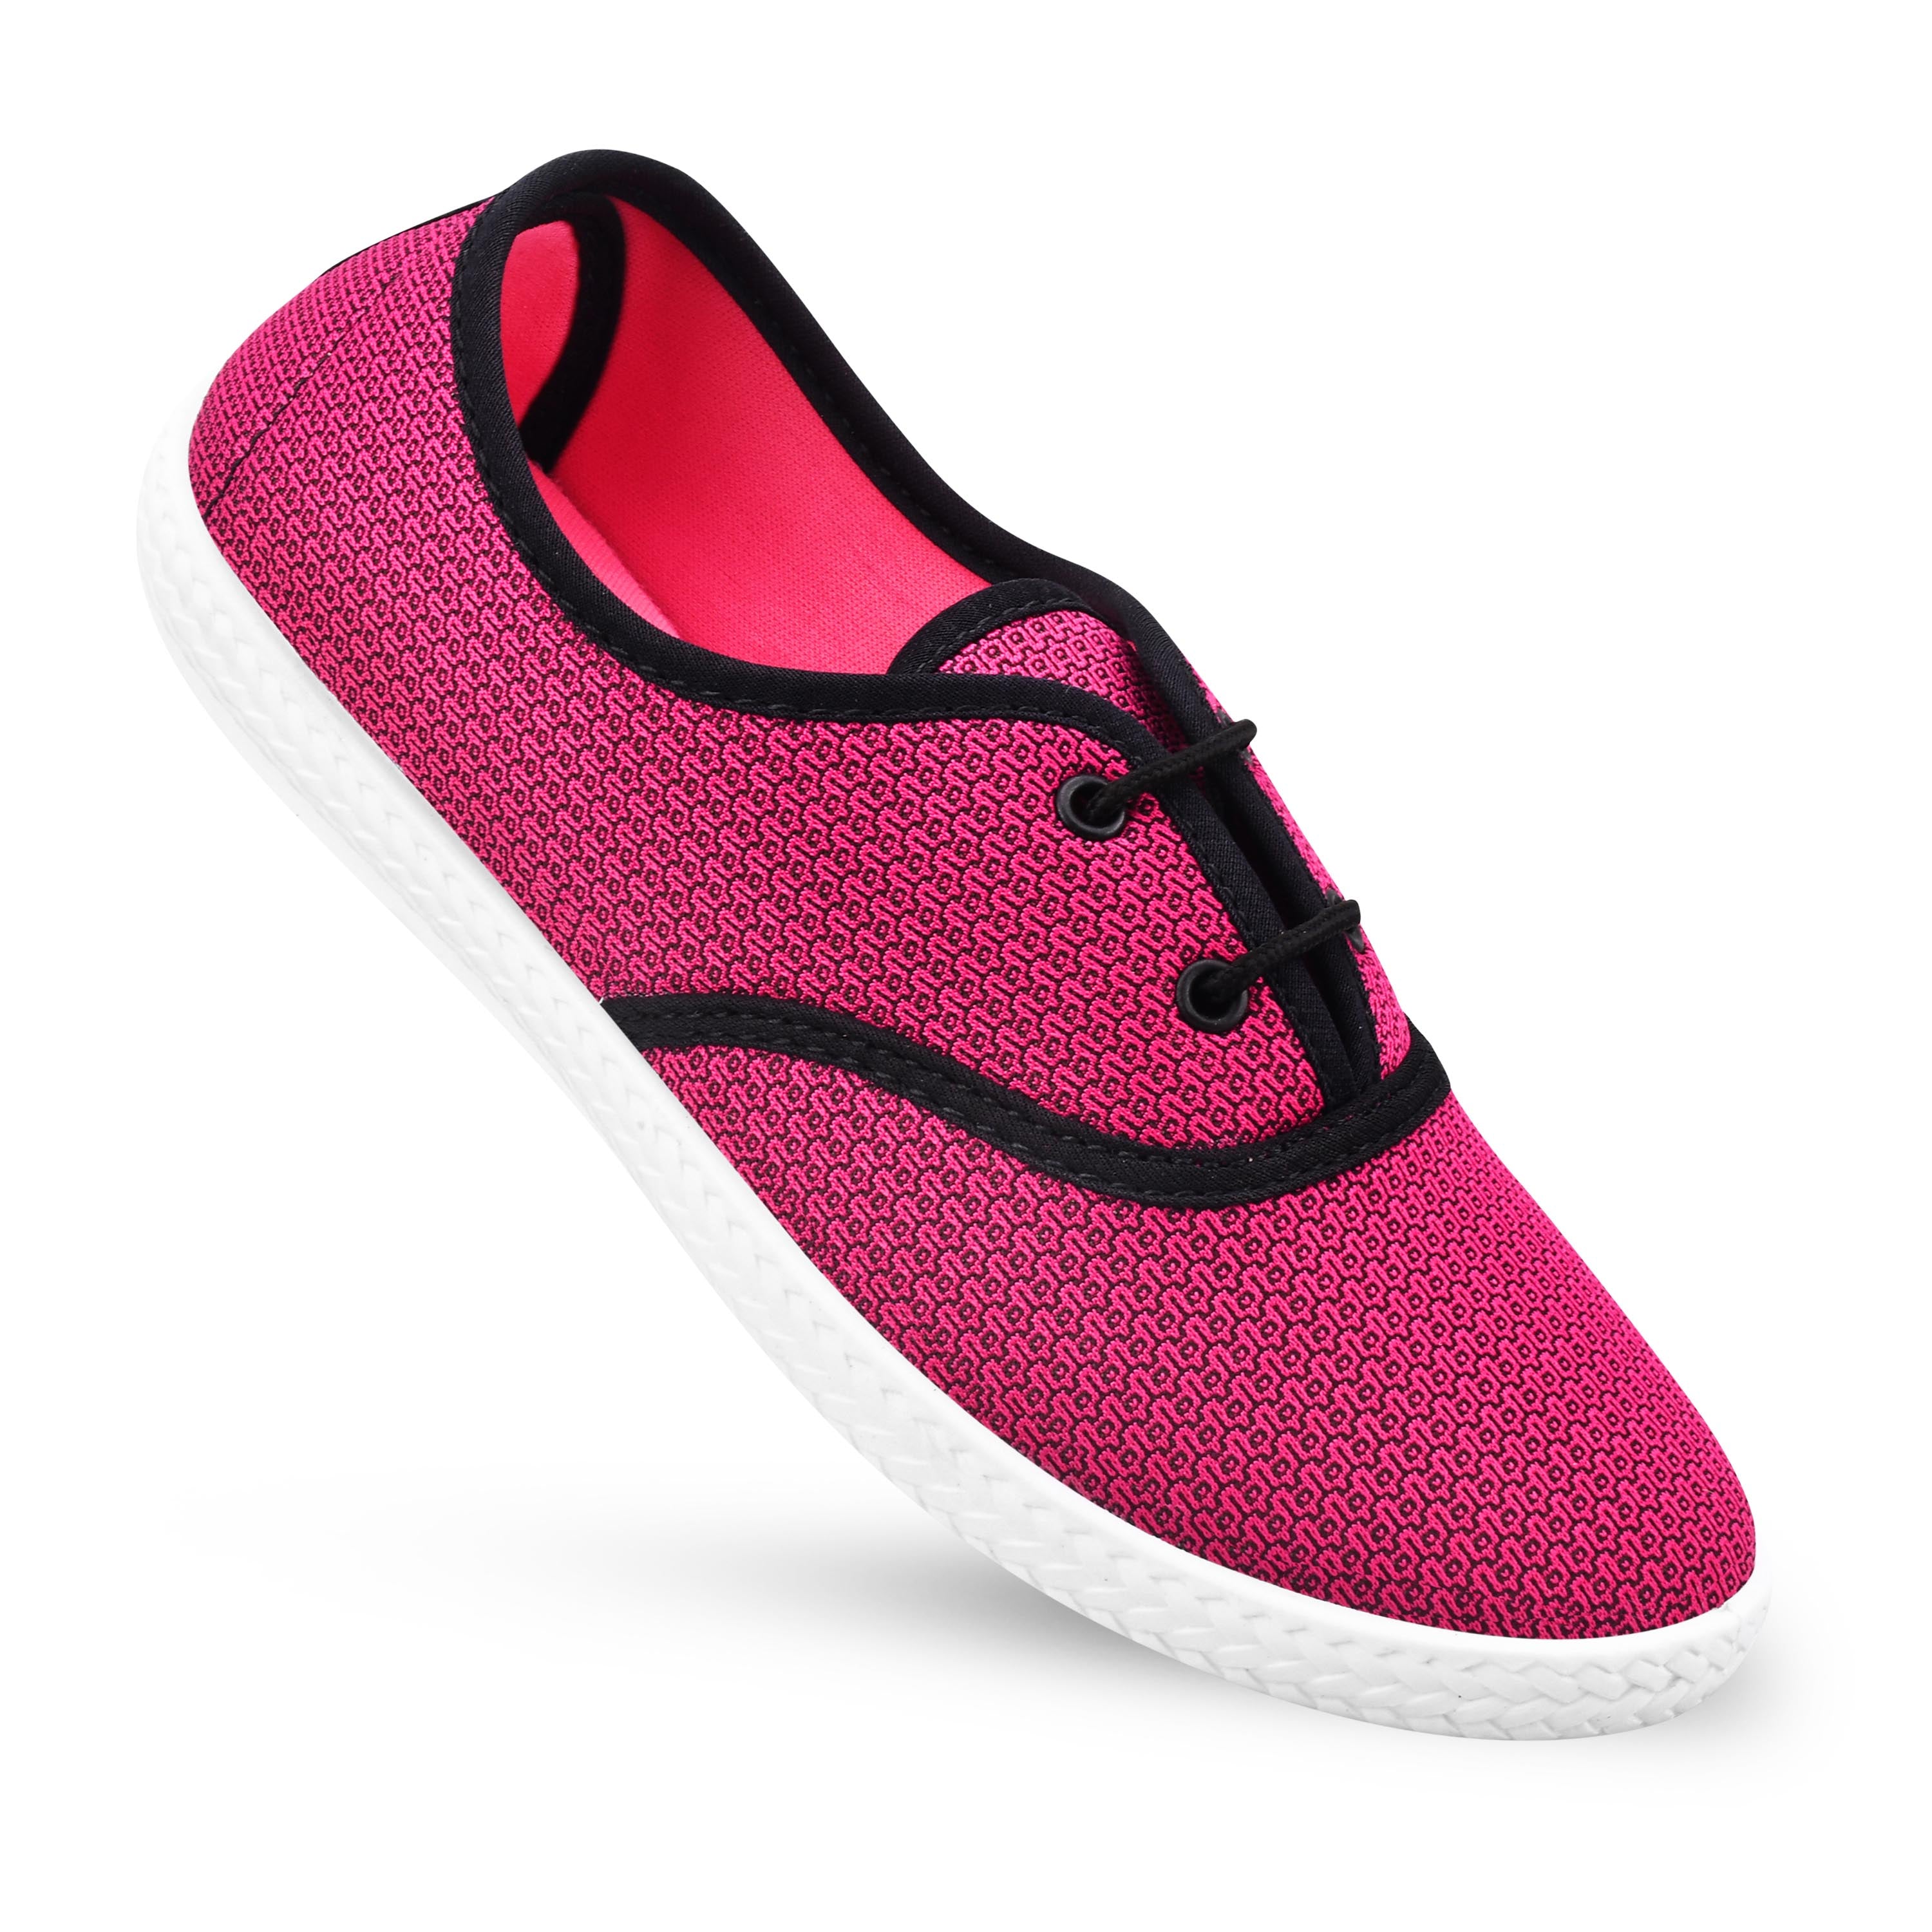 Paragon  K1010L Women Casual Shoes | Sleek &amp; Stylish | Latest Trend | Casual &amp; Comfortable | For Daily Wear